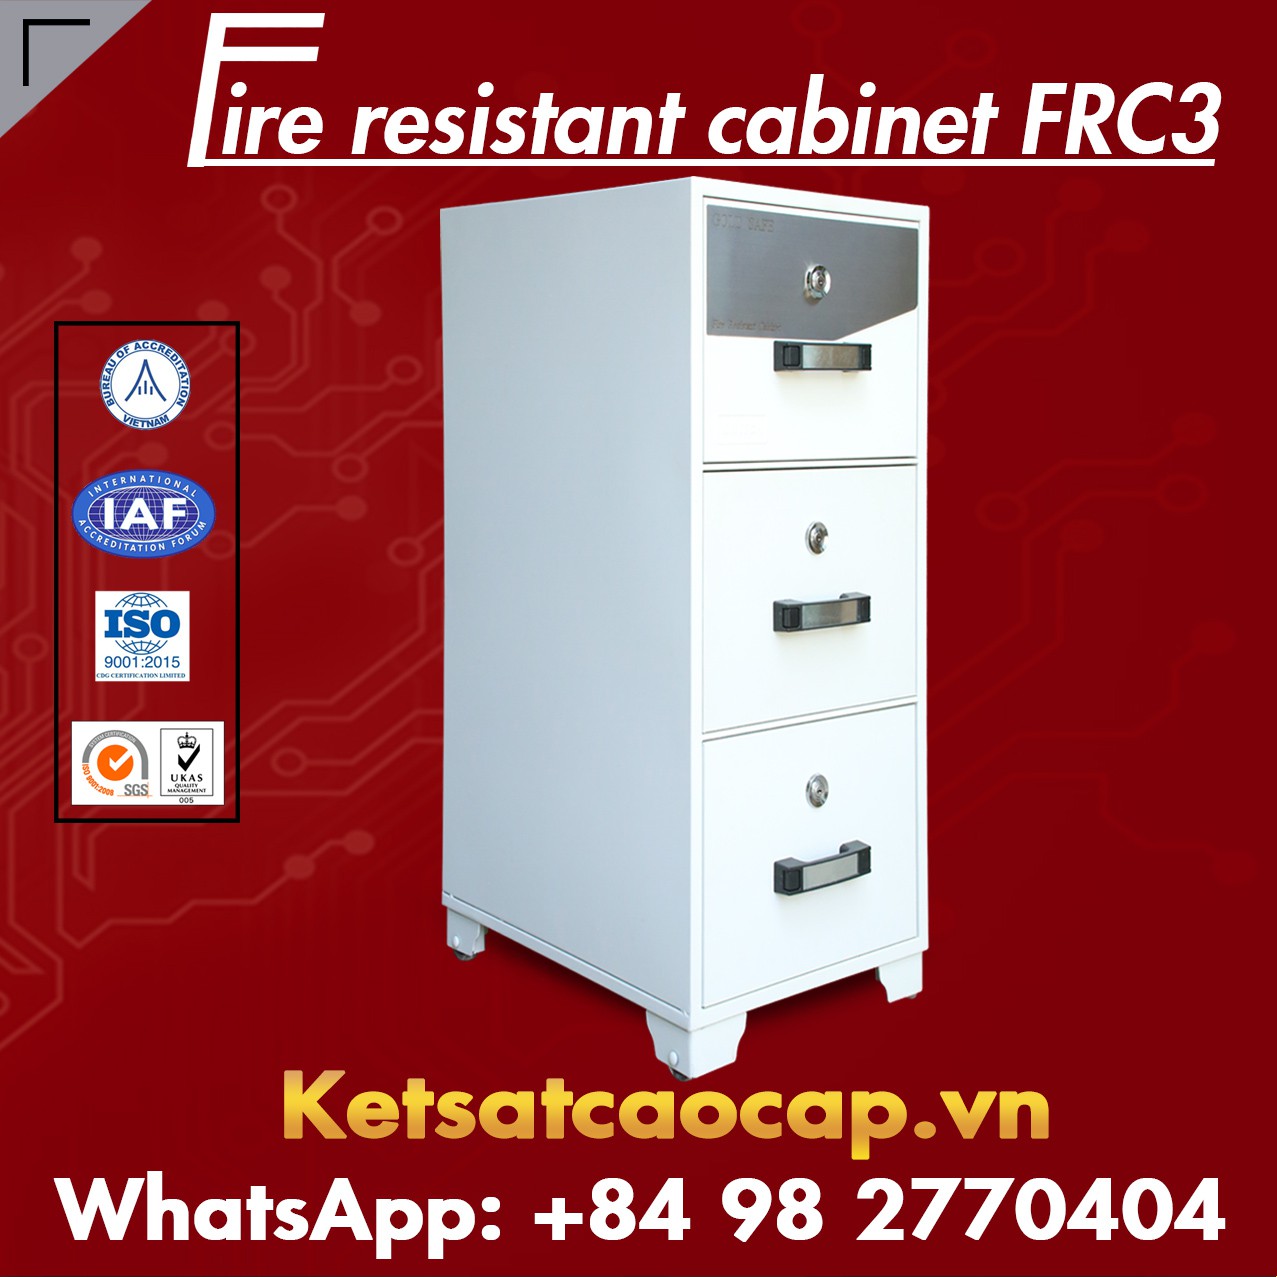 Protect Documents with Fireproof Filing Cabinets